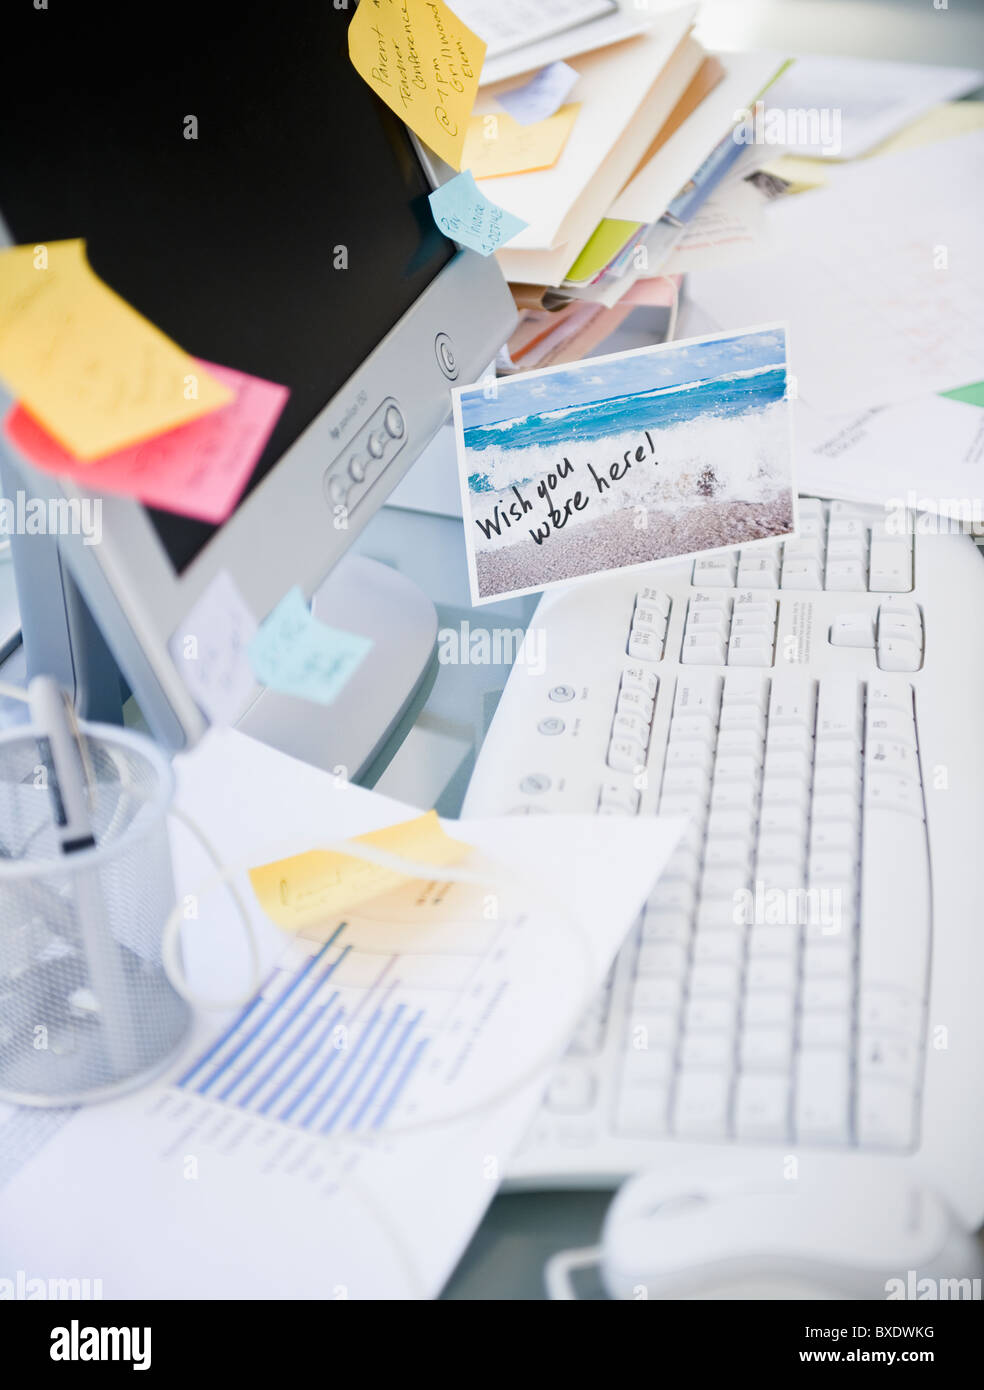 Cluttered desk Stock Photo